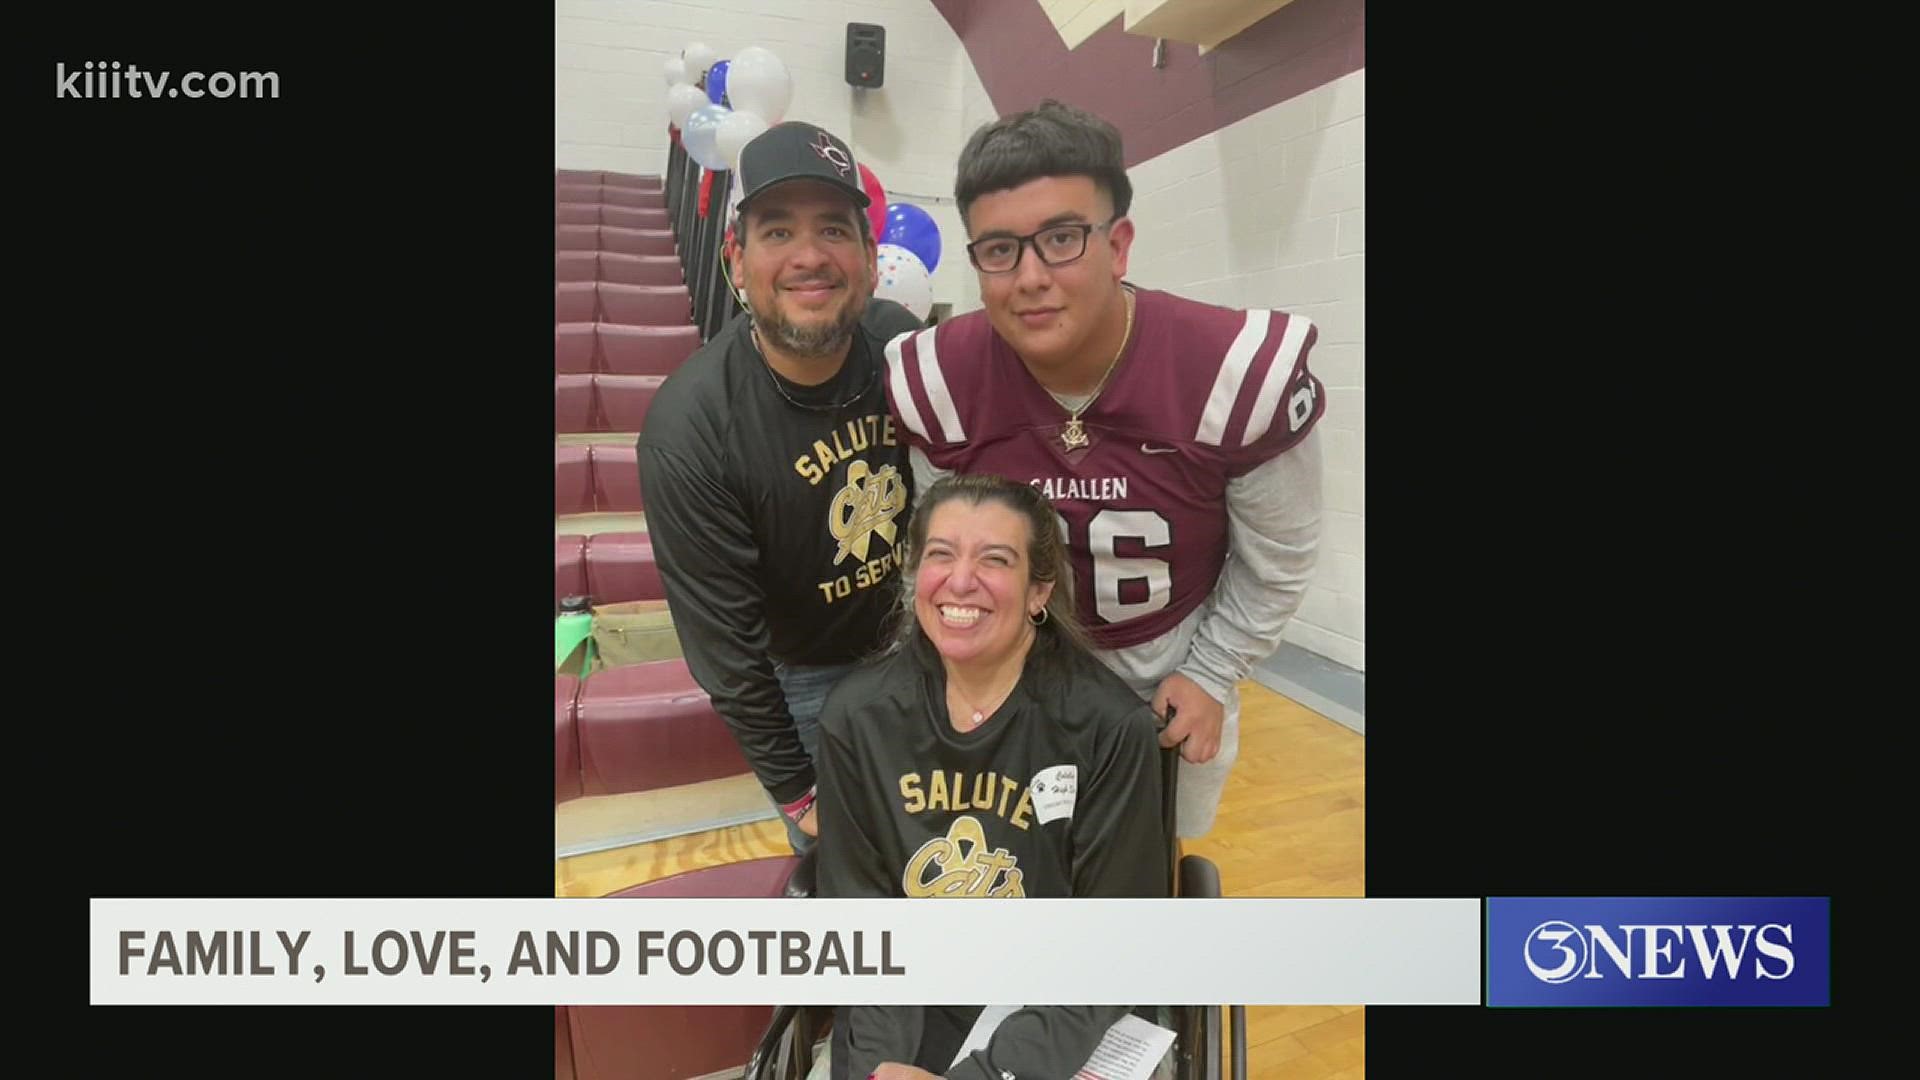 Daniel Garcia Jr. will now play for the 'Lobos' of Sul Ross State University. He is playing at the next level, even after almost losing his biggest fan - his mom.